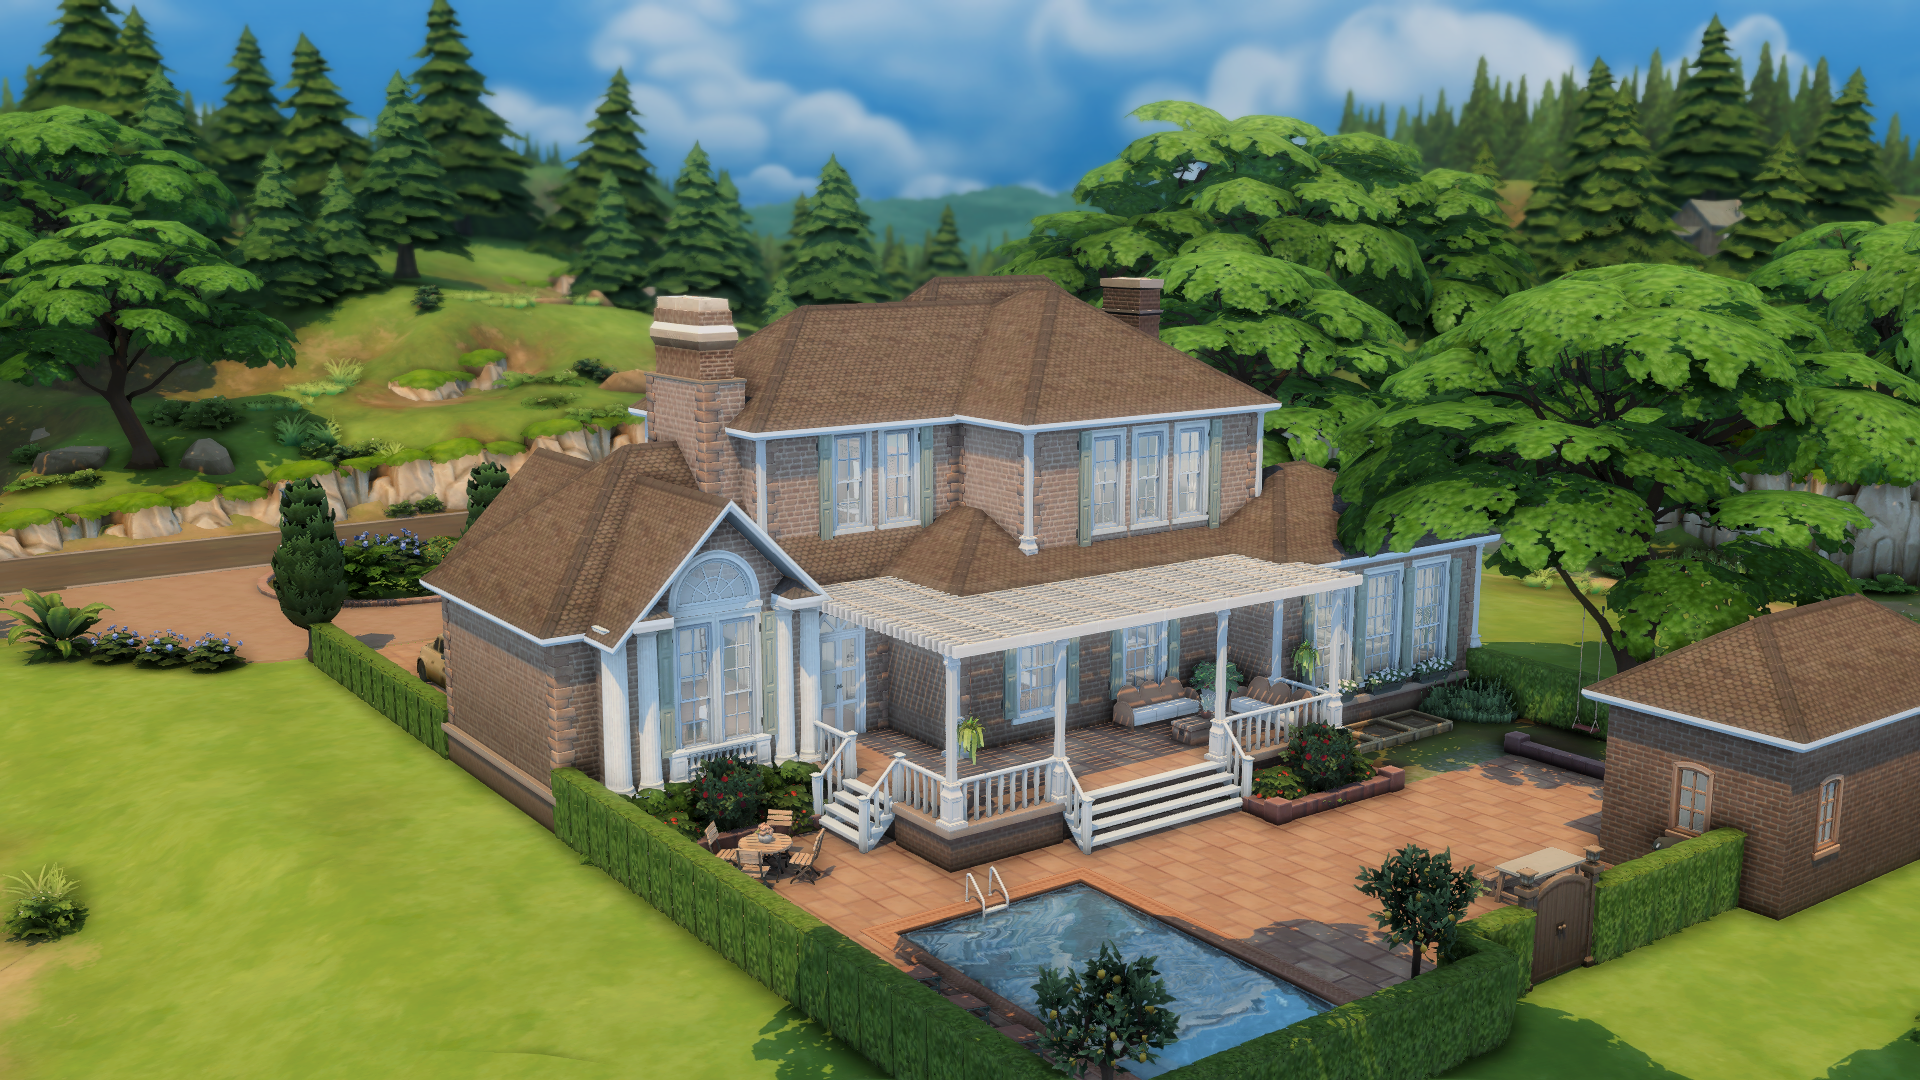 Tiger Bai - The Sims 4 Sims / Households - CurseForge